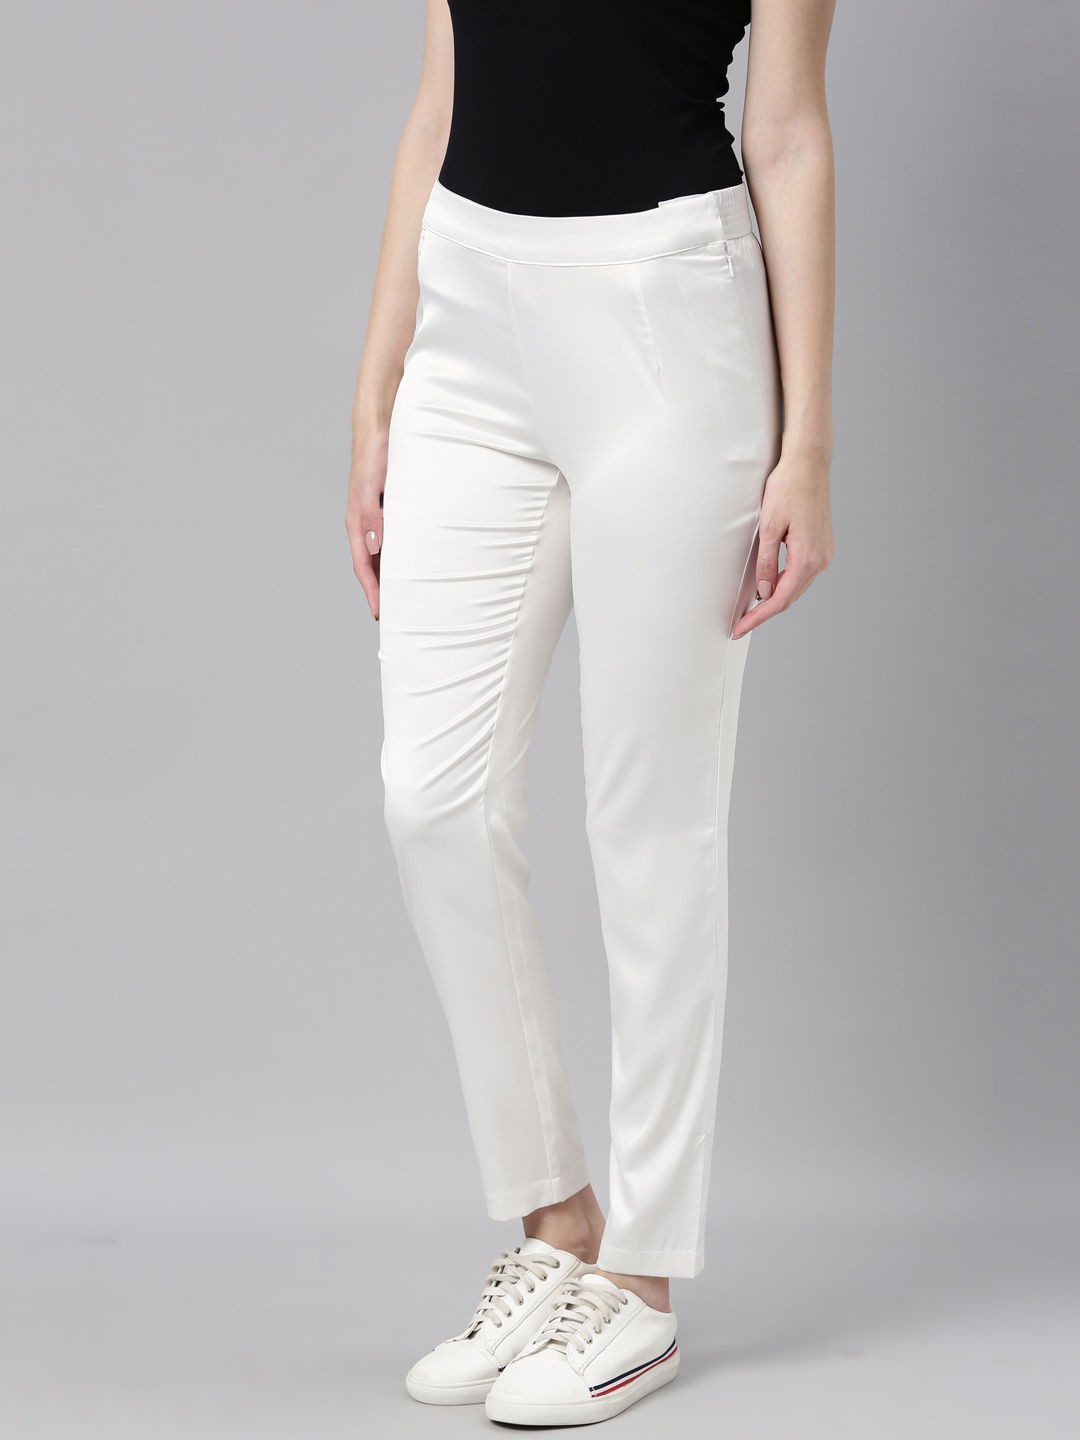 GLADLY Flared Women Yellow, White Trousers - Buy GLADLY Flared Women  Yellow, White Trousers Online at Best Prices in India | Flipkart.com